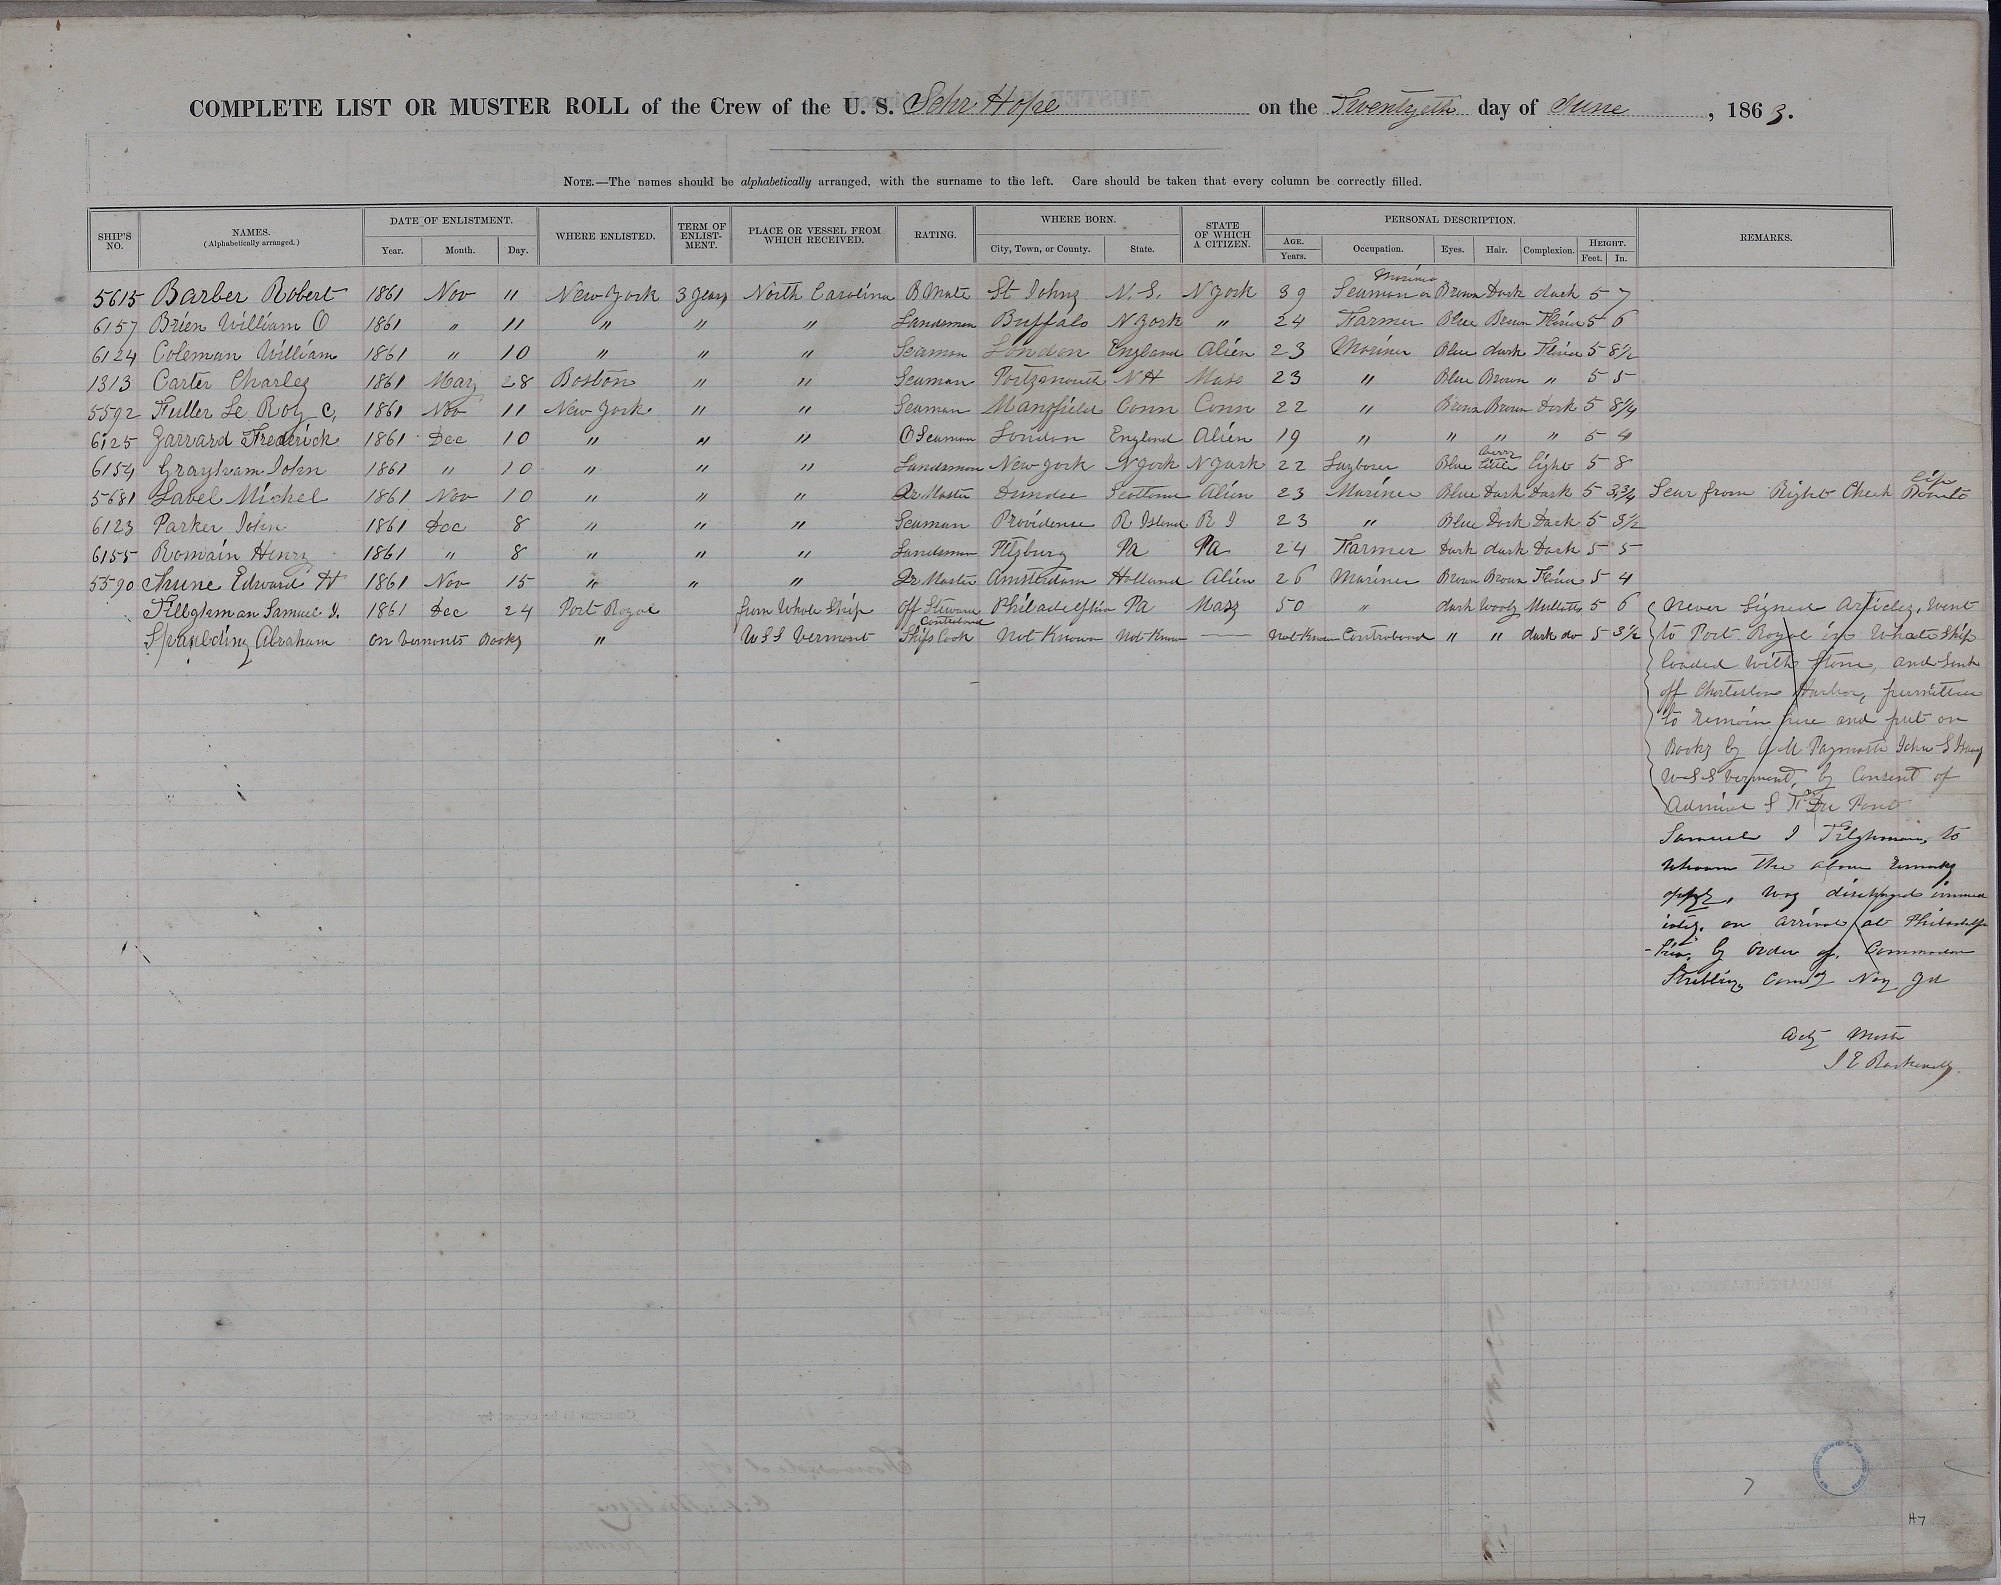 The June 20, 1863, muster roll entry page for the “U.S. Schooner Hope” also known as the Revenue Cutter Hope. (National Archives)